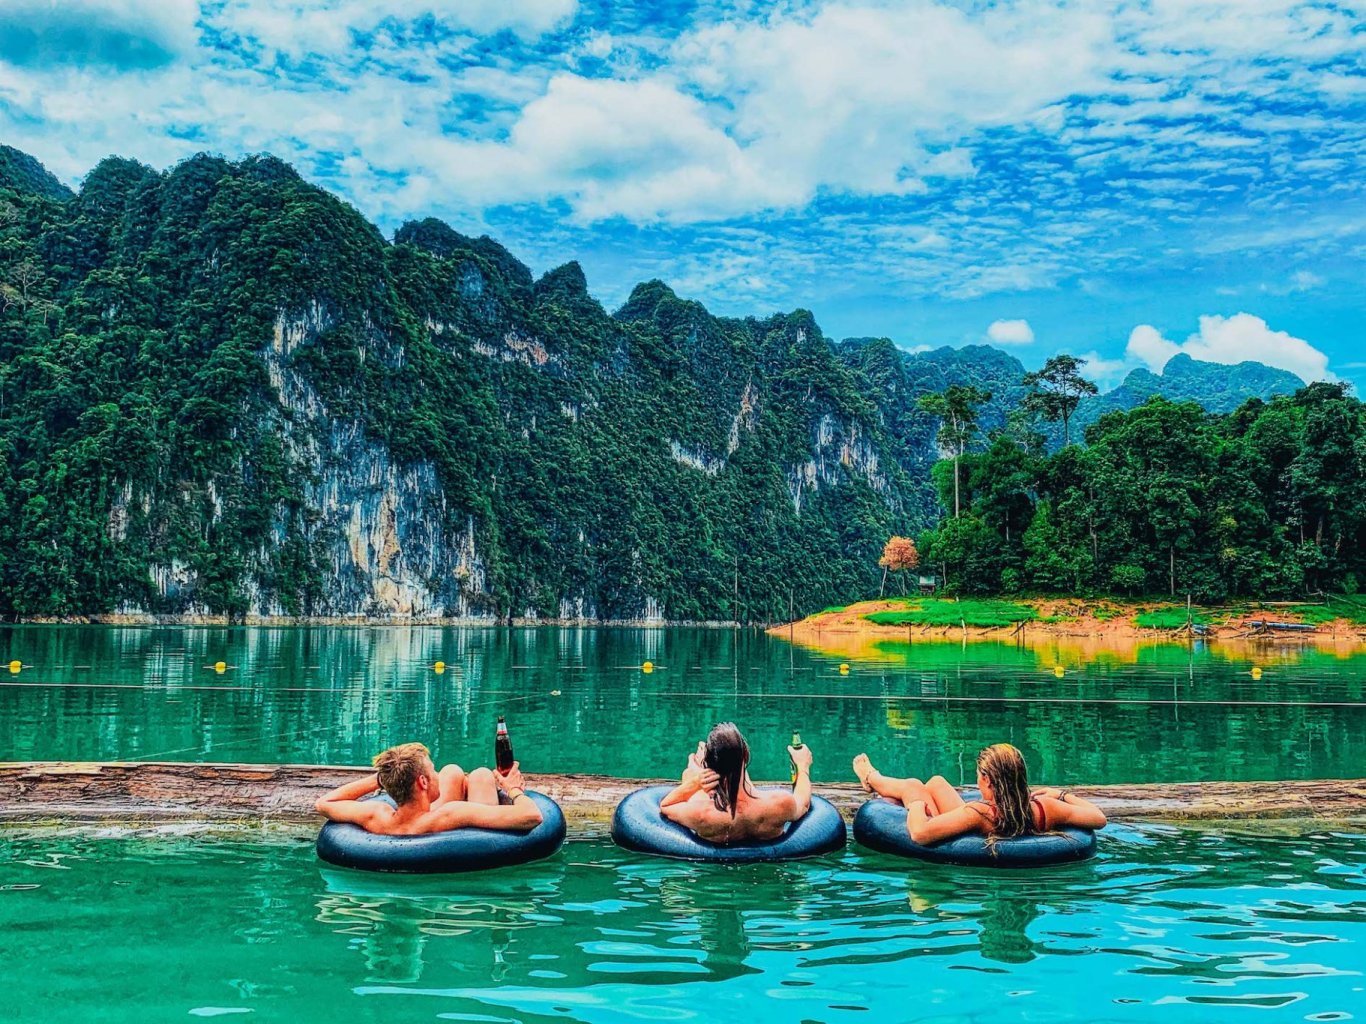 A trio admiring the view of Khao Sok national park in Thailand from doughnuts in the water